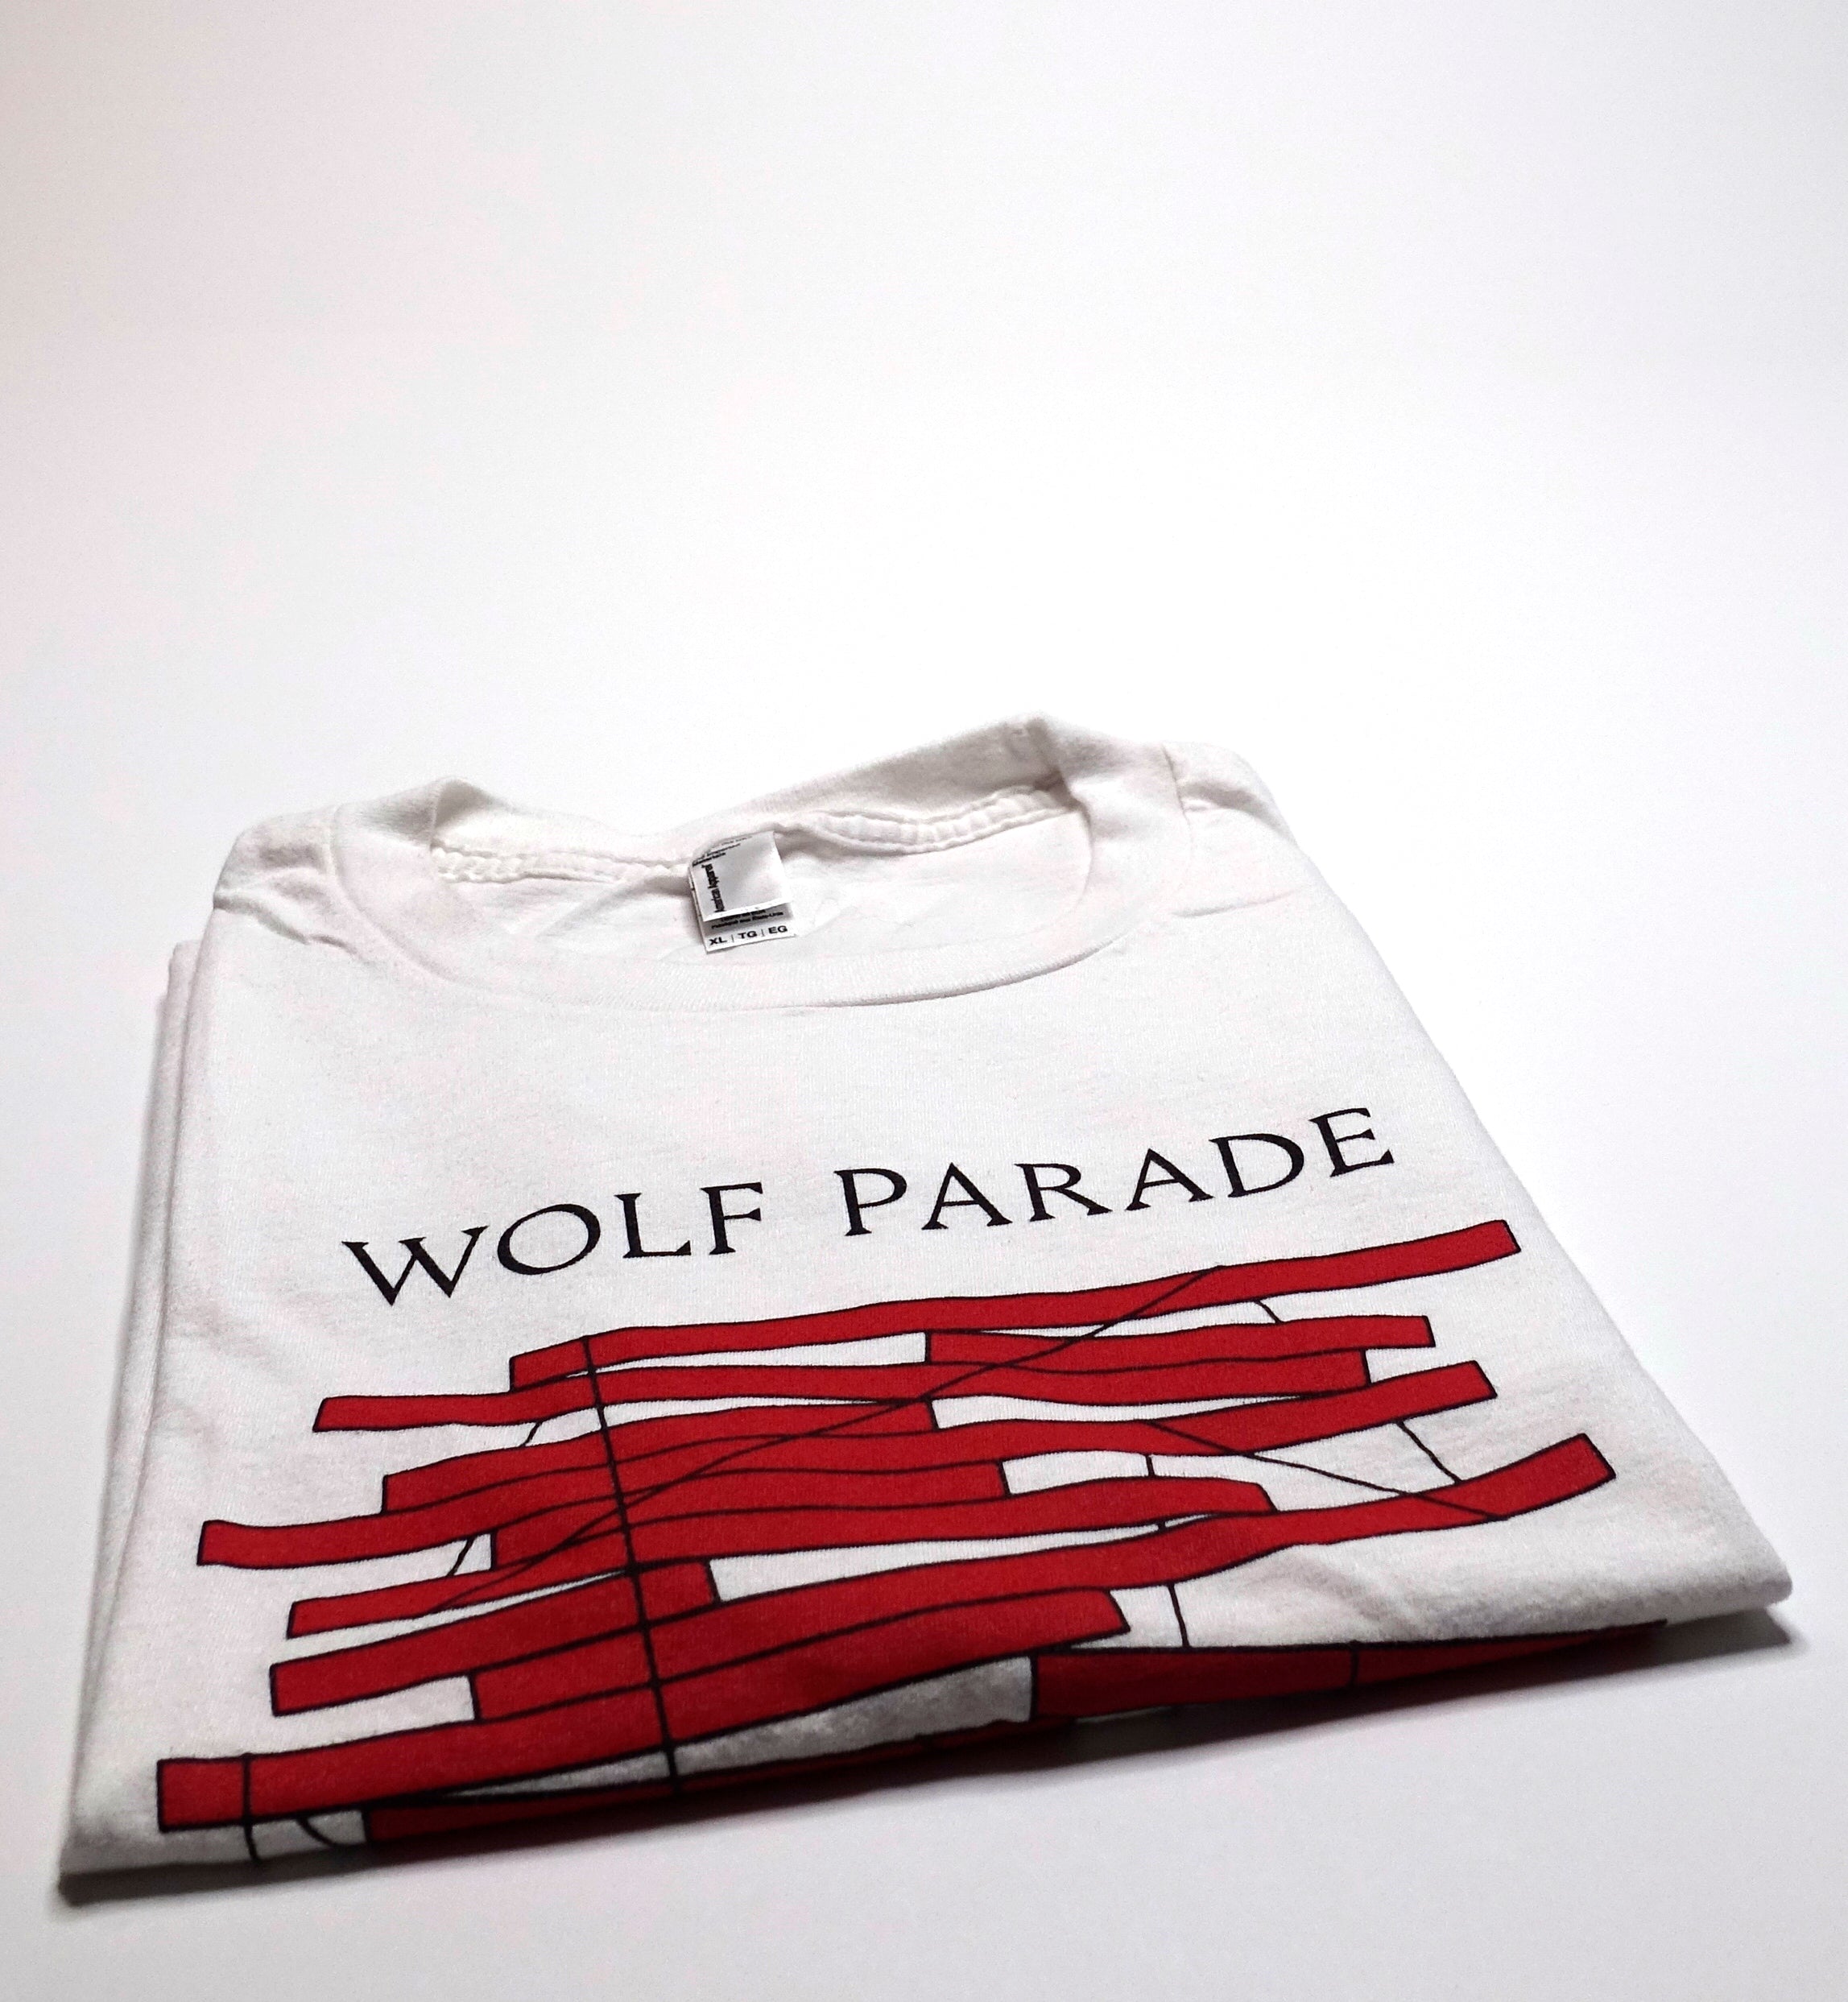 Wolf Parade - Stacked Bars 2017 Tour Shirt Size XL